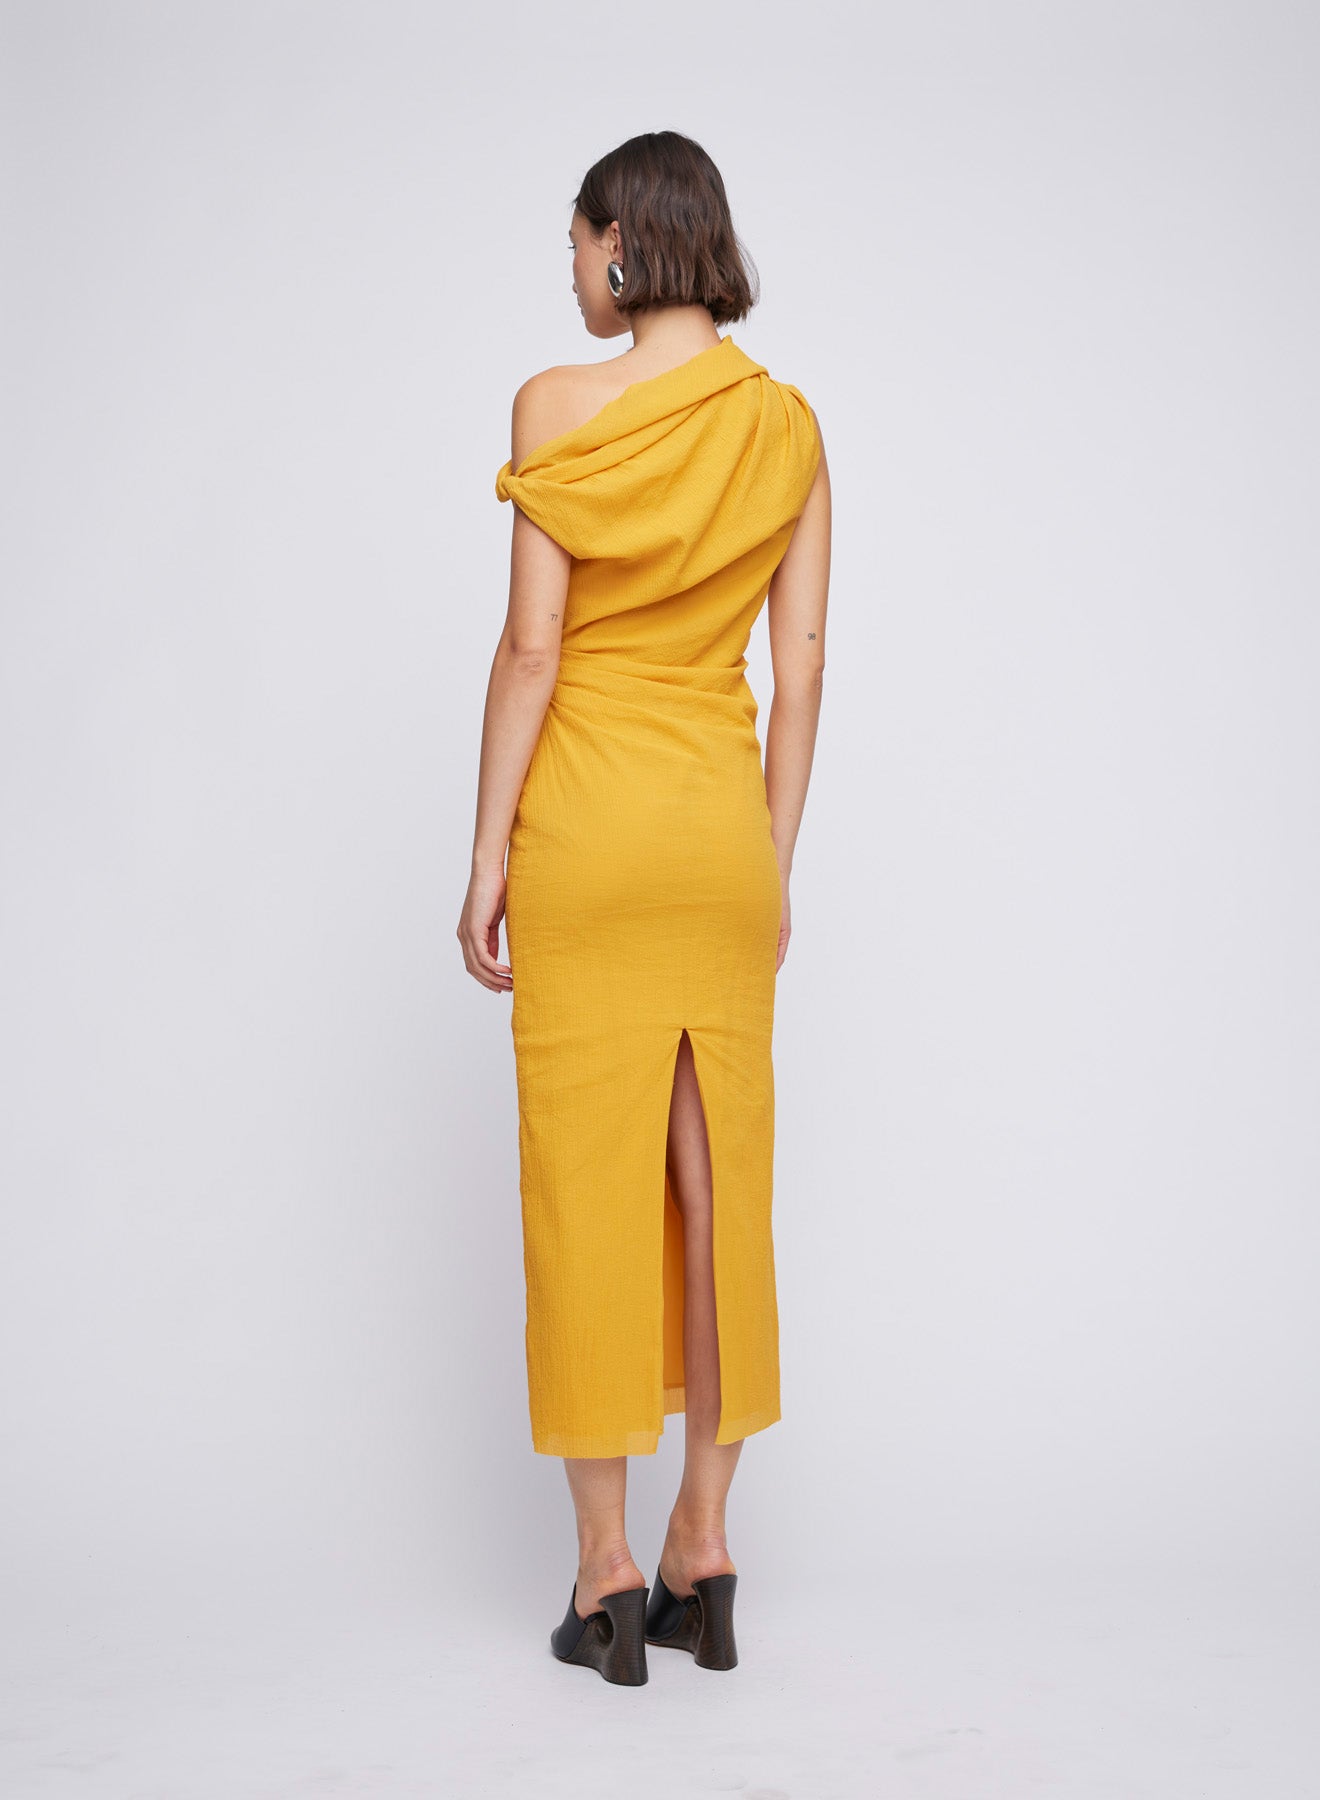 ANNA QUAN Off-Shoulder Crinkle Midi Dress, a versatile and timeless addition to your wardrobe. Discover all new dresses for any event or special occasion. Bright dress, bright midi-dress, orange midi-dress, orange event dress, wedding guest dress, formal dress.